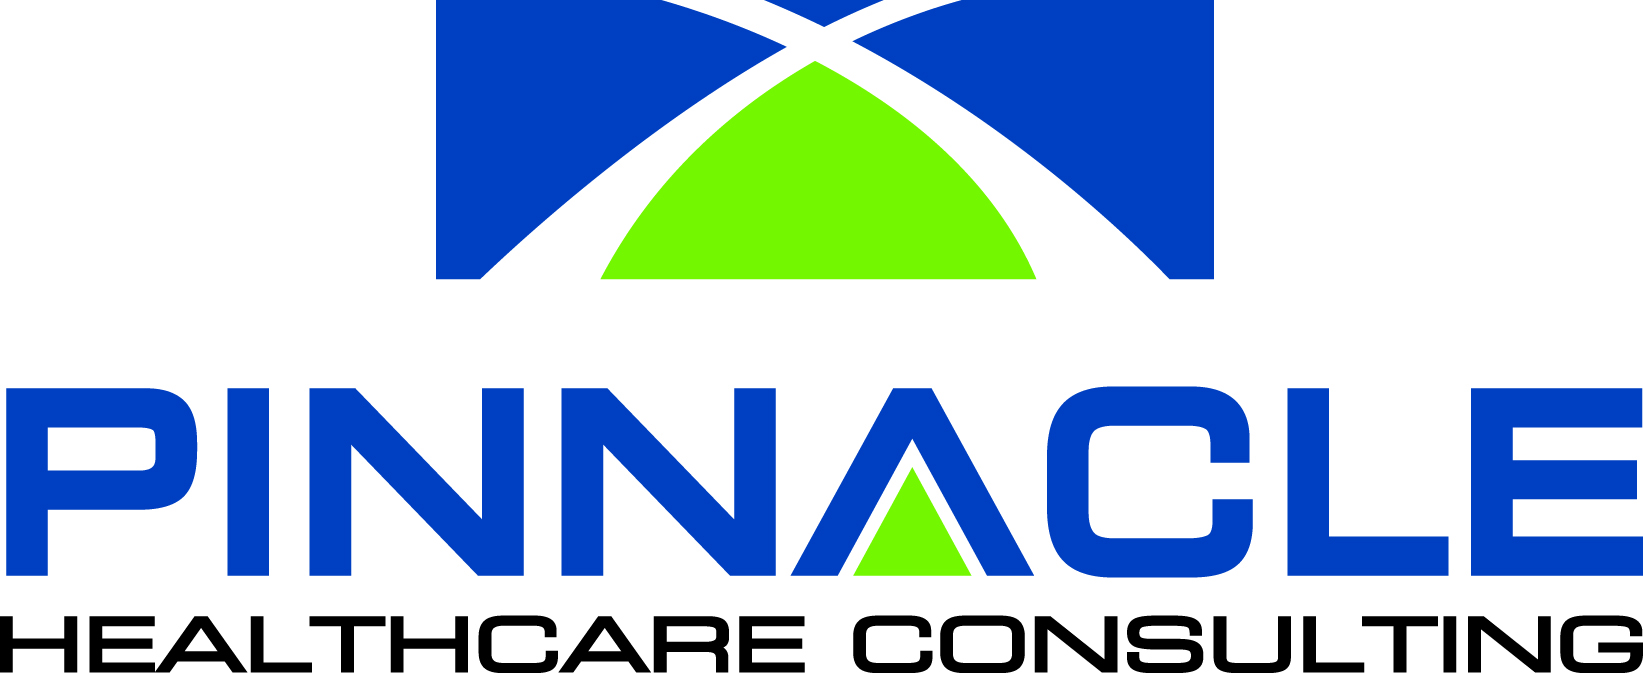 Pinnacle Healthcare Consulting Logo